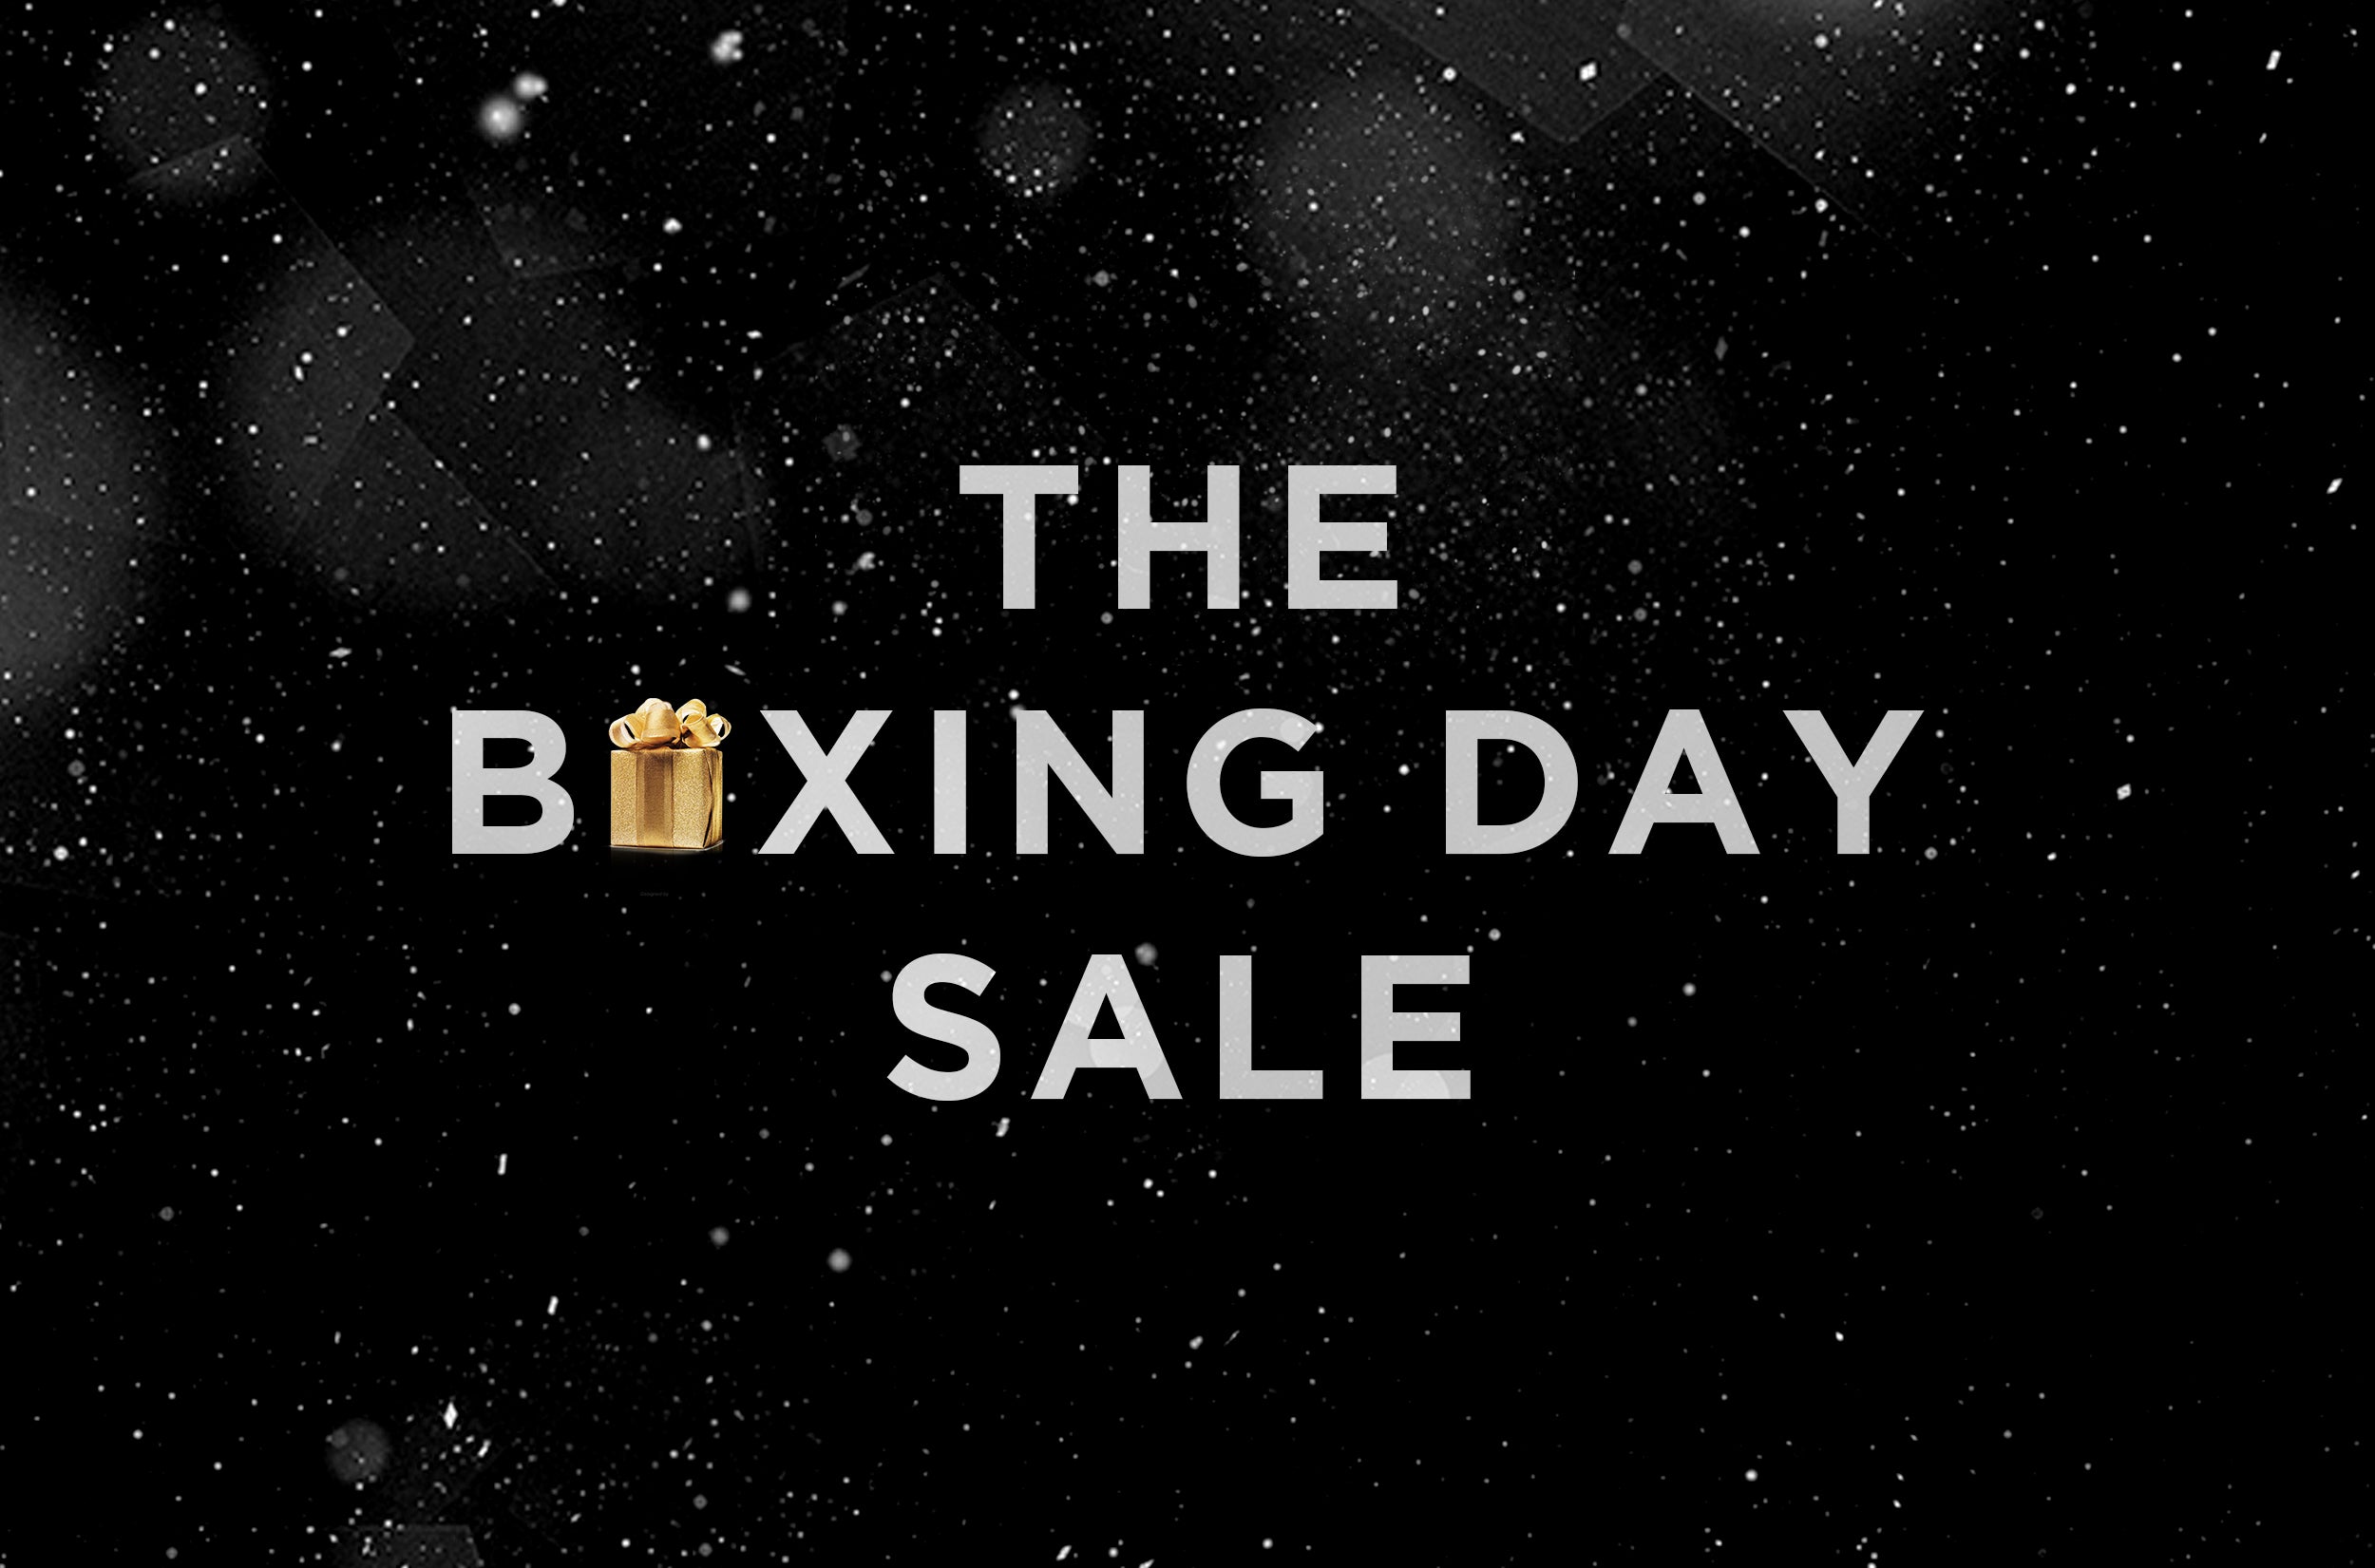 The Boxing Day Sale. Sitewide. Worldwide. December 24th.